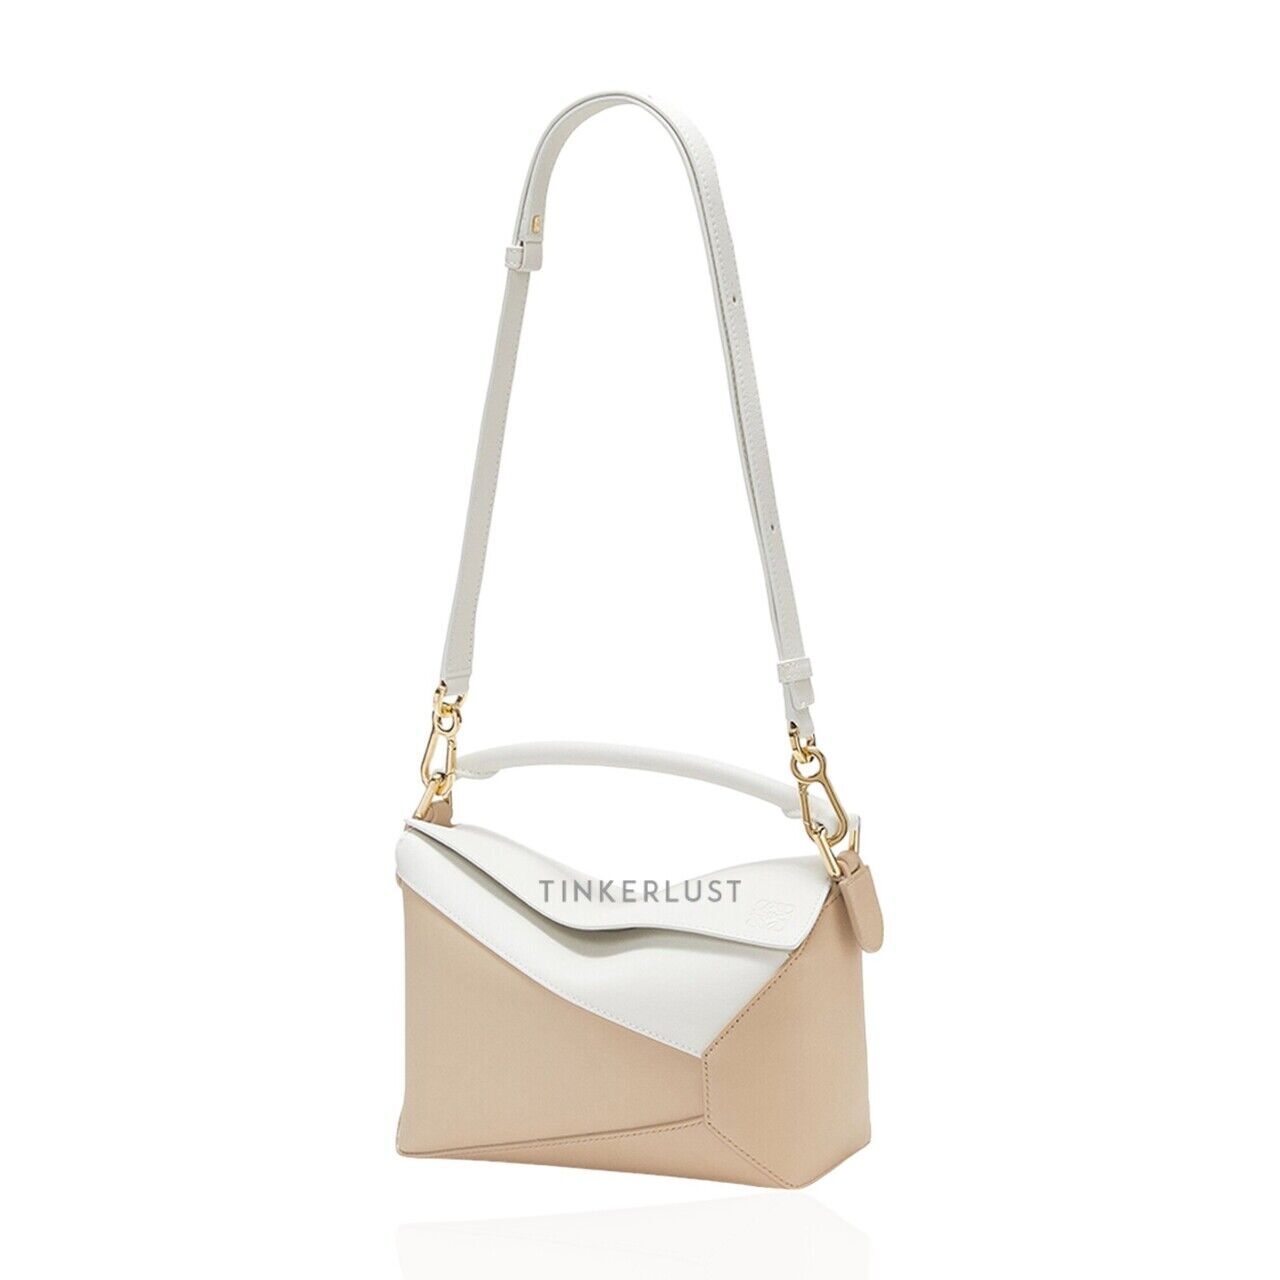 Loewe Small Puzzle Bag in Soft White/Paper Craft Classic Calfskin Satchel Bag